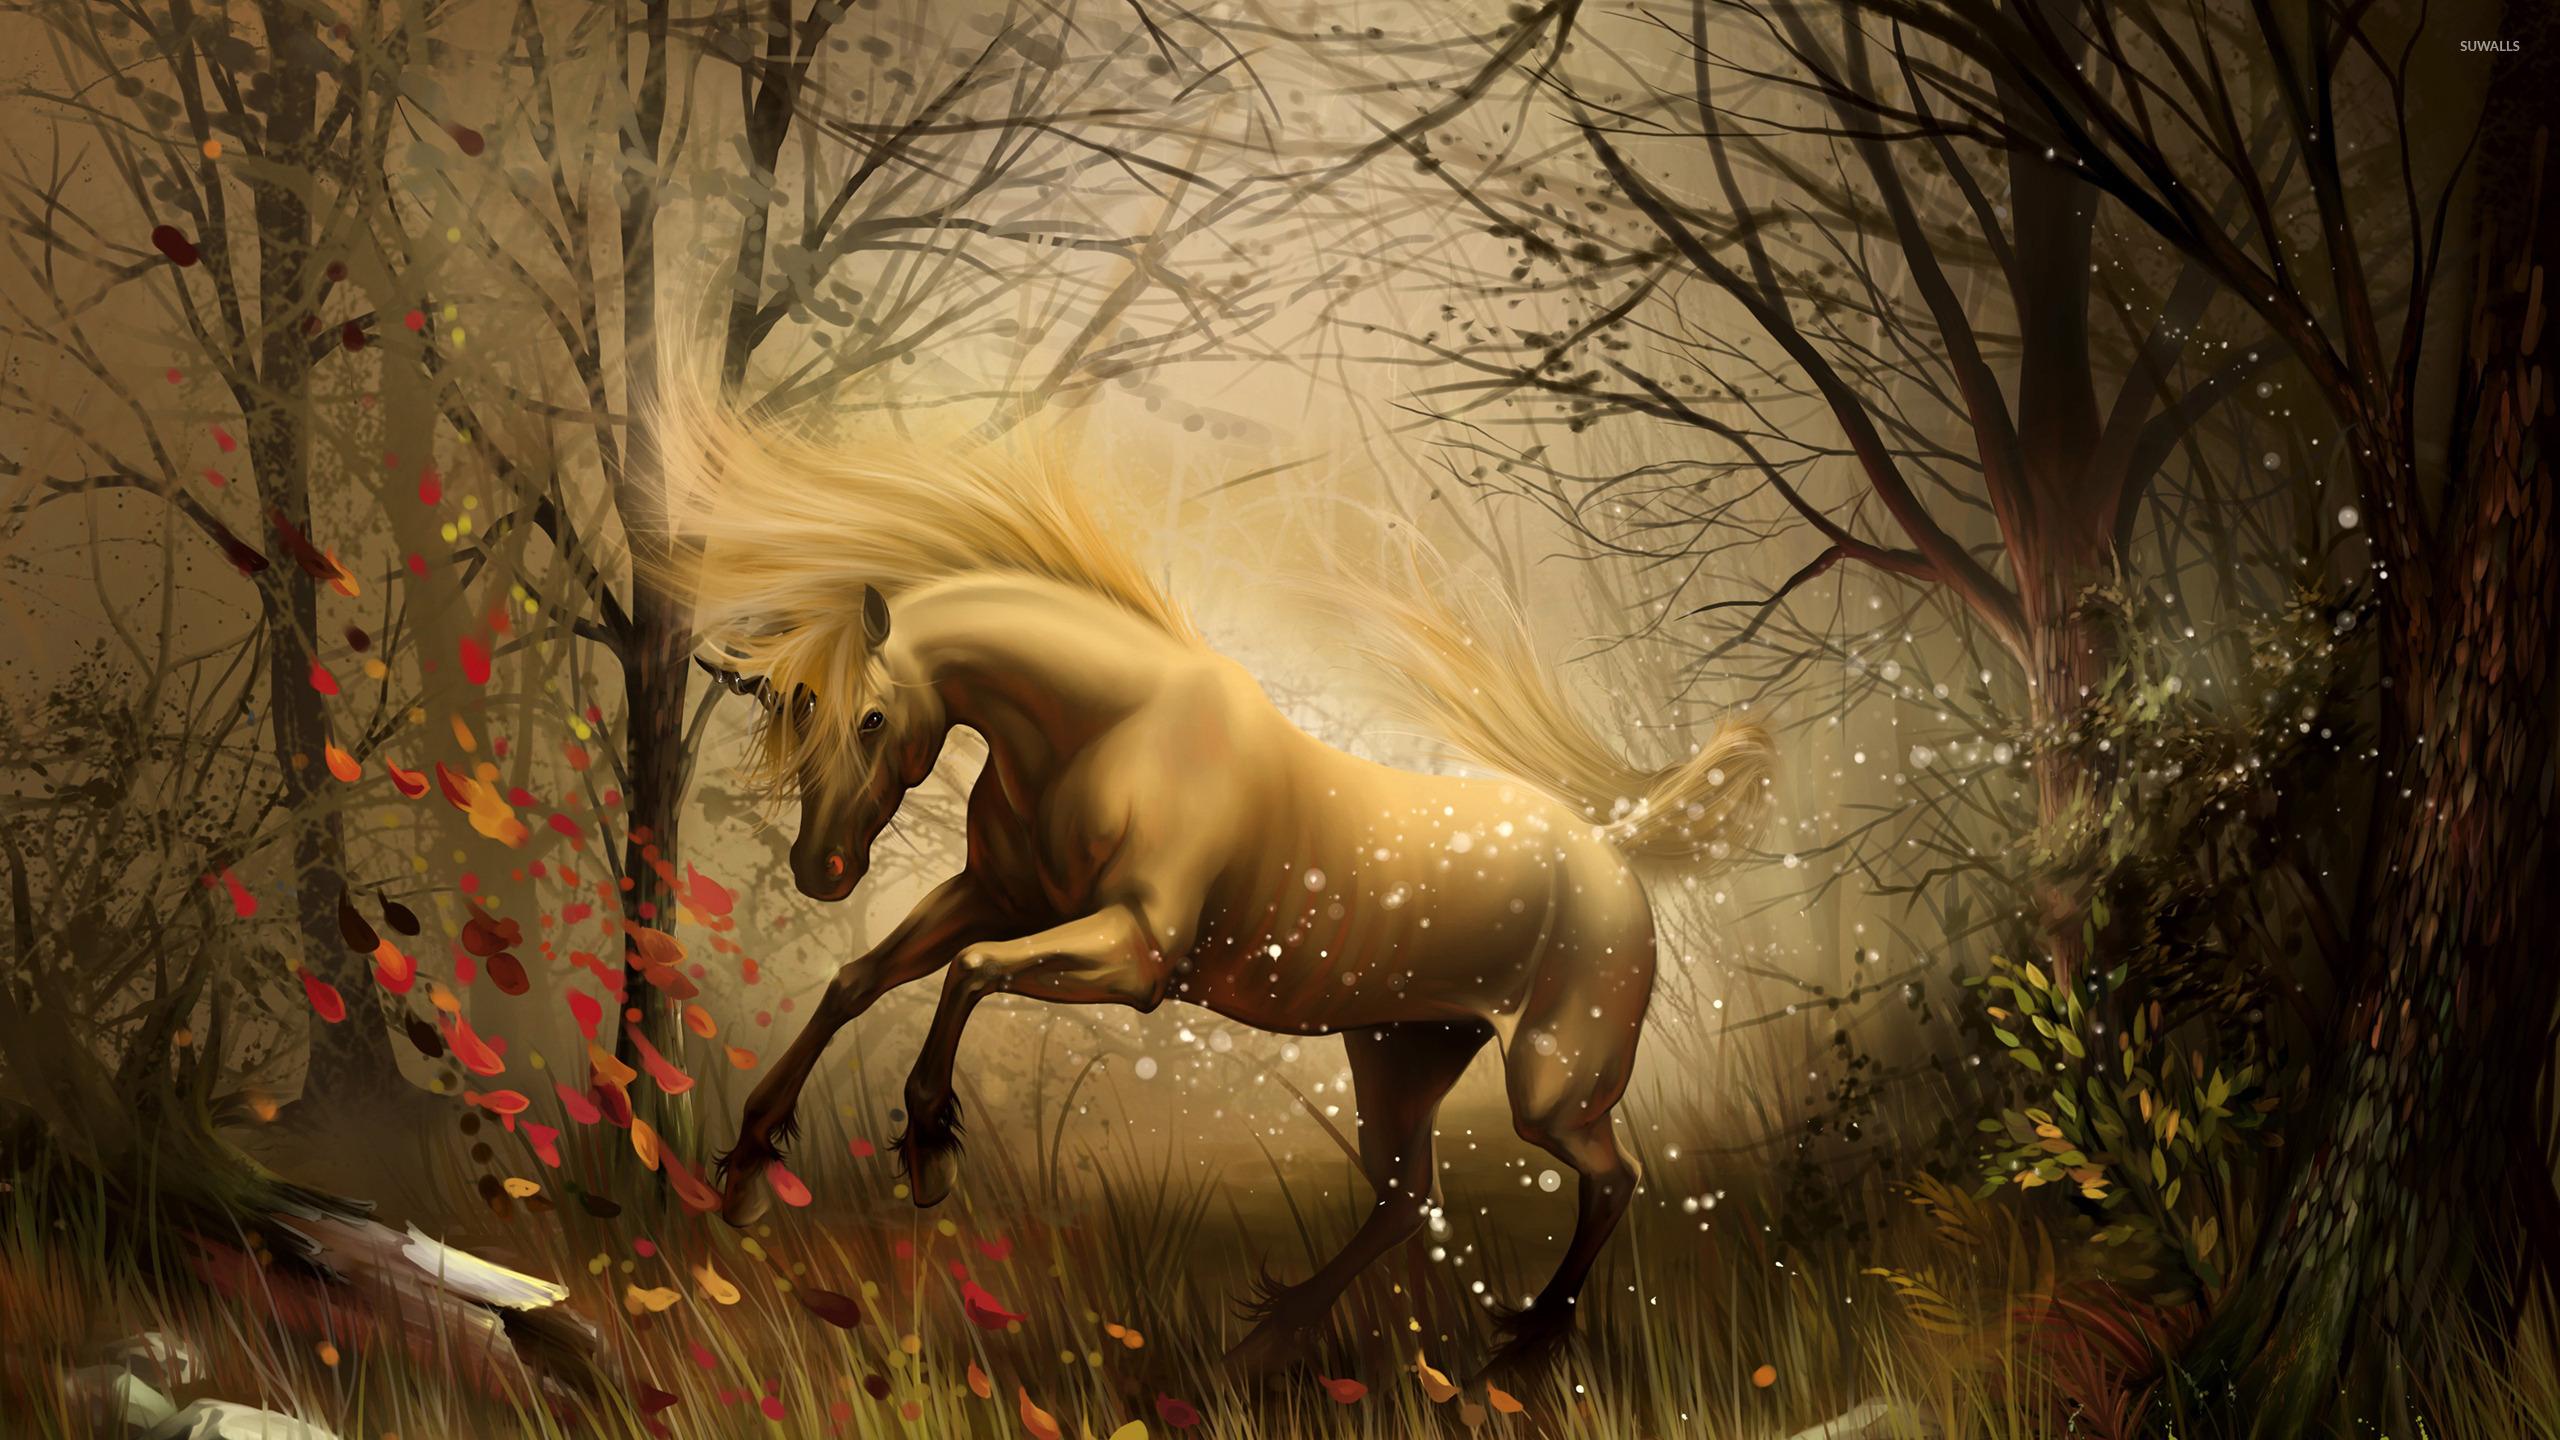 Unicorn in the enchanted forest wallpaper wallpaper